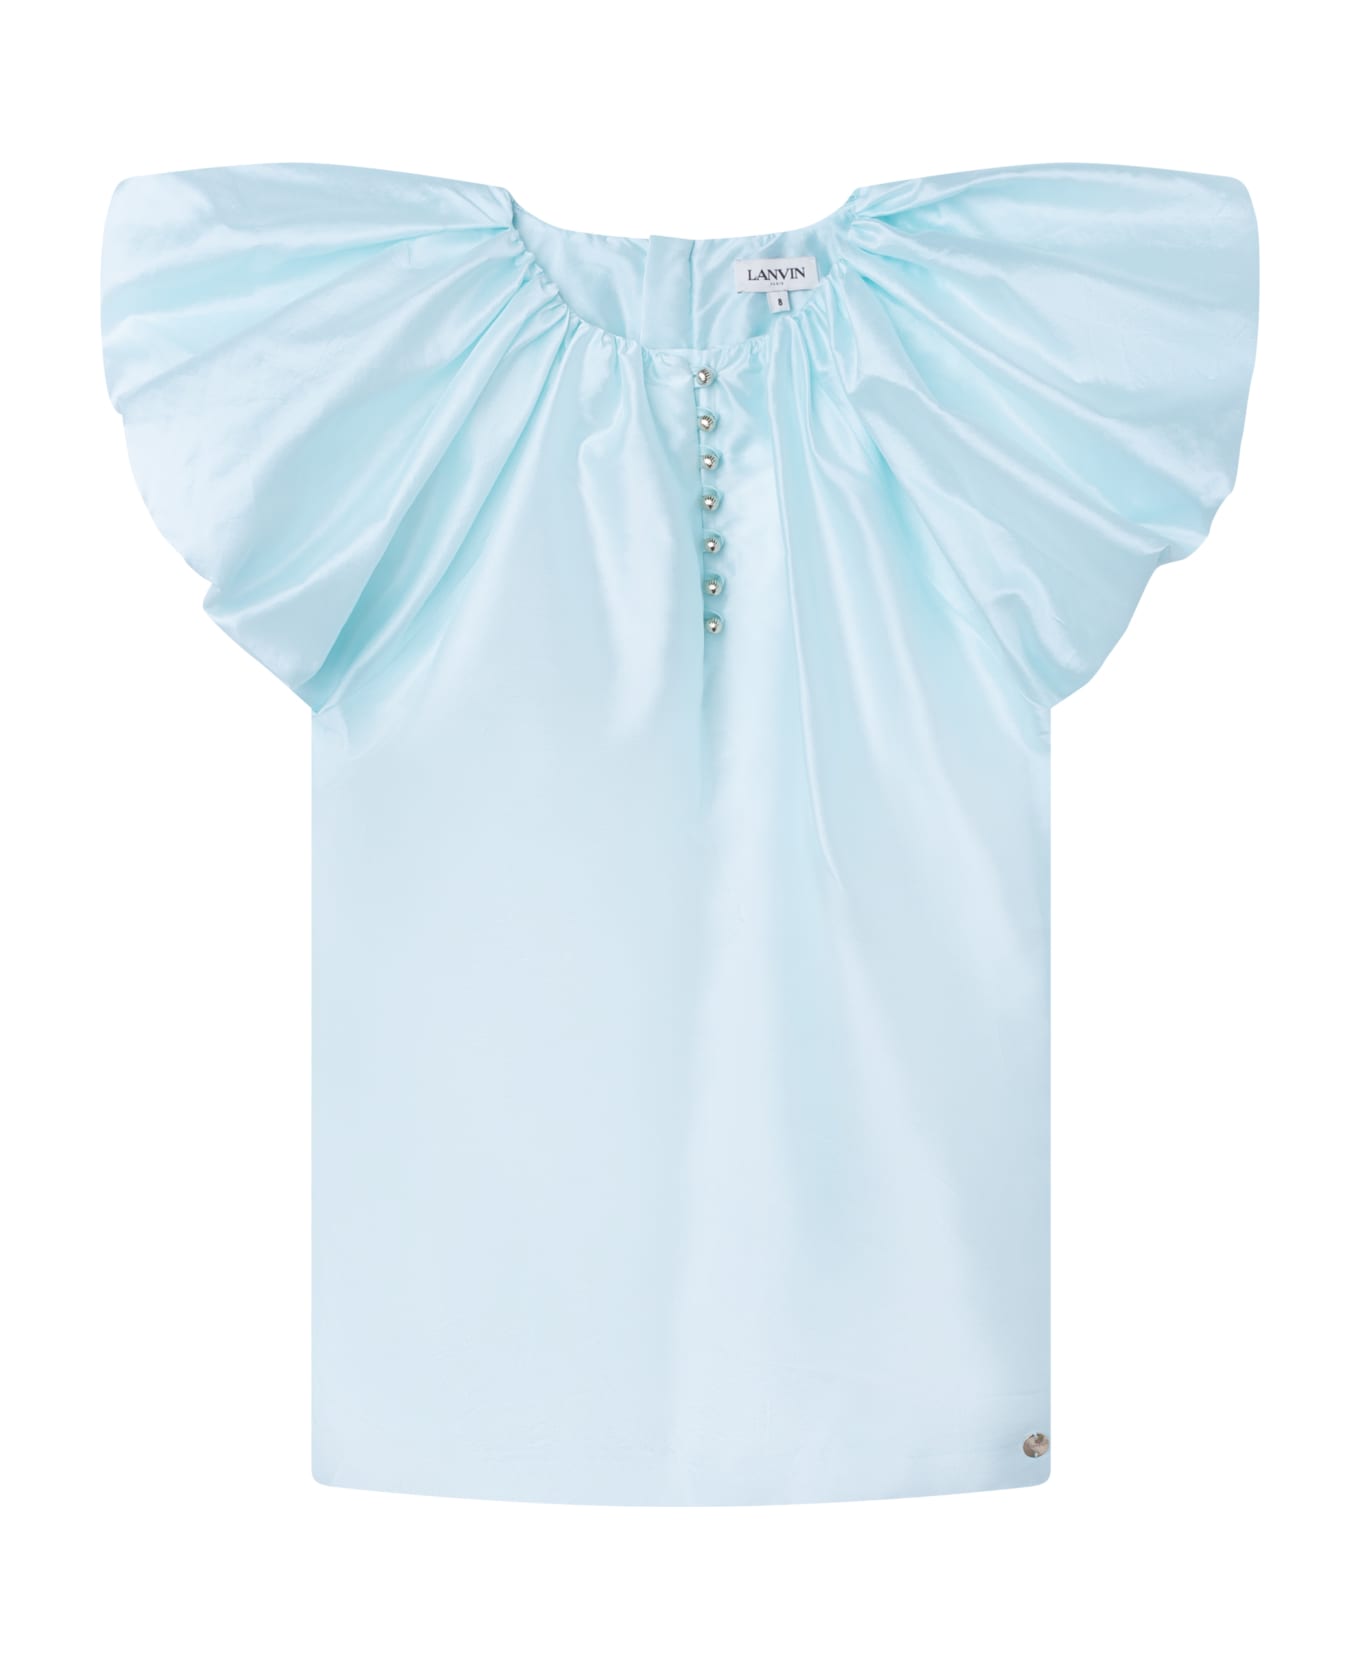 Lanvin Dress With Balloon Sleeves - Light blue